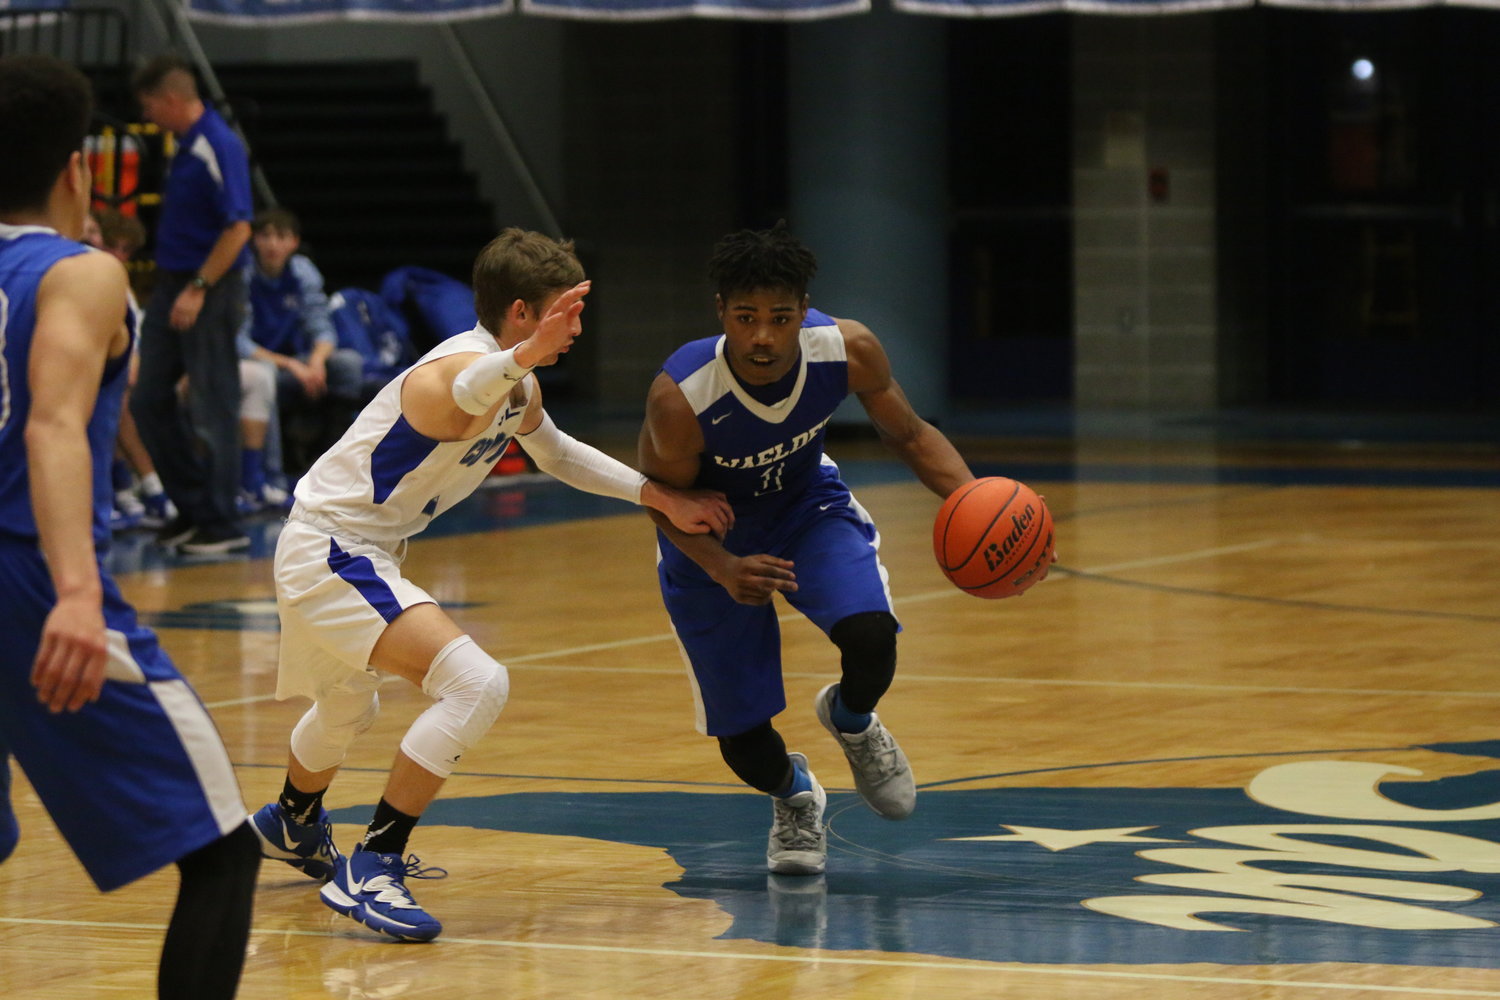 Isaiah Jones-Miller drives by a McMullen County defender in Waelder’s 66-52 victory on Tuesday. Jones-Miller finished the night with 16 points, tied for a team best with Colby Thorne.